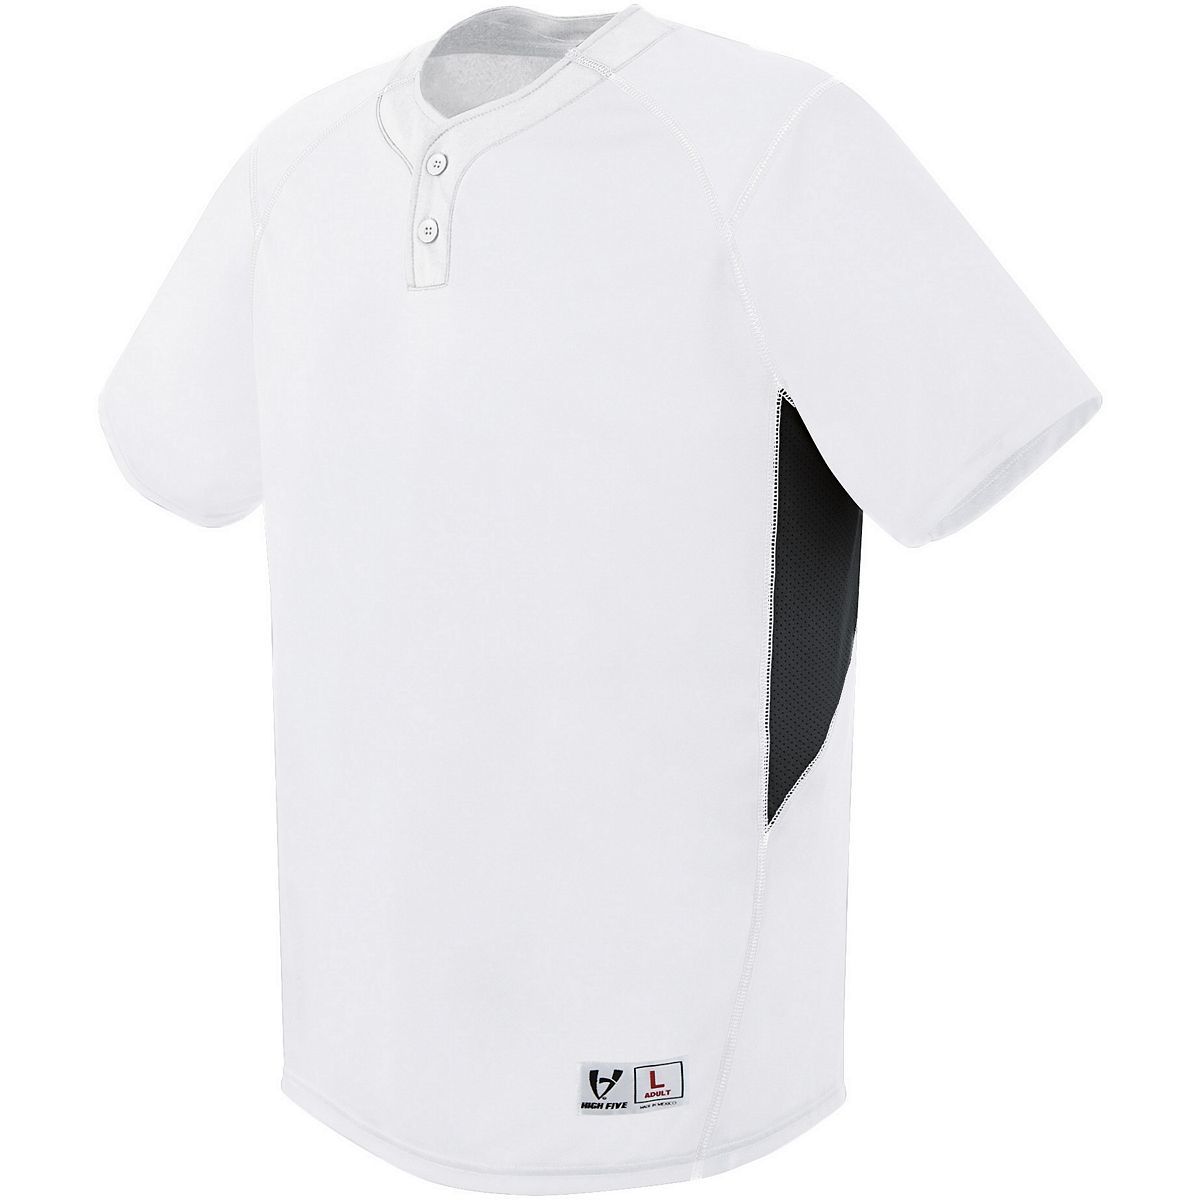 Augusta Sportswear Youth Bandit Two-Button Jersey in White/Black/White  -Part of the Youth, Youth-Jersey, Augusta-Products, Baseball, Shirts, All-Sports, All-Sports-1 product lines at KanaleyCreations.com